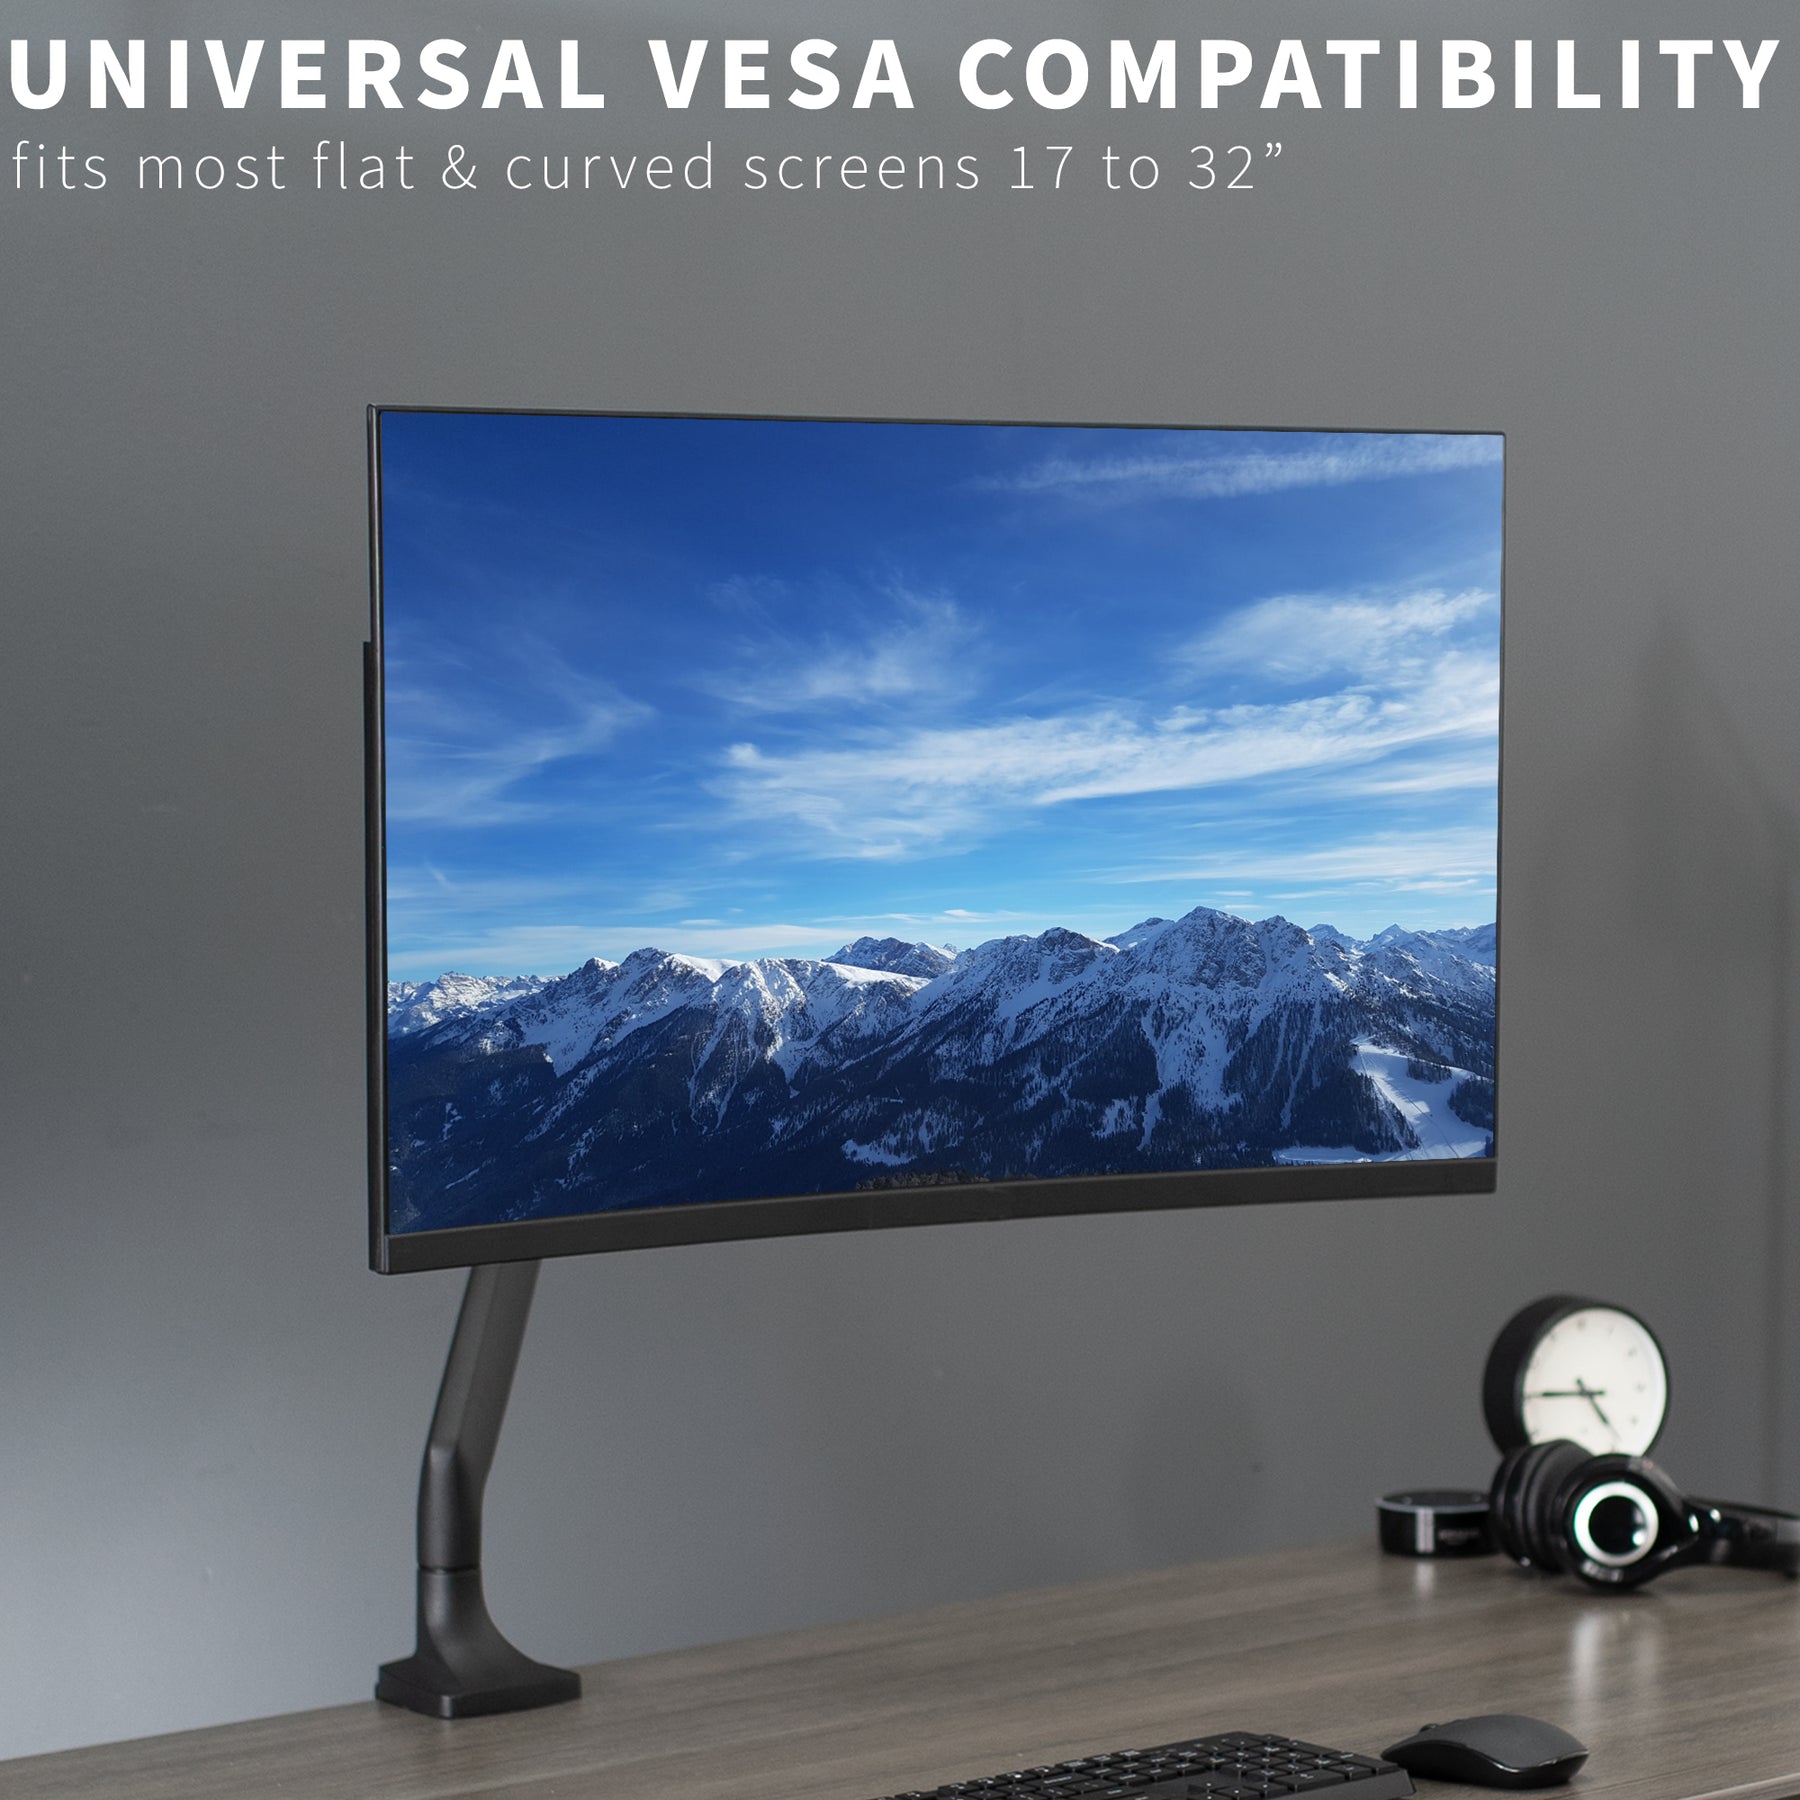 VIVO Single Monitor Height Adjustable Counterbalance Pneumatic Arm Desk  Mount Stand, Classic, Universal VESA Fits Screens up to 32 inches,  STAND-V001O